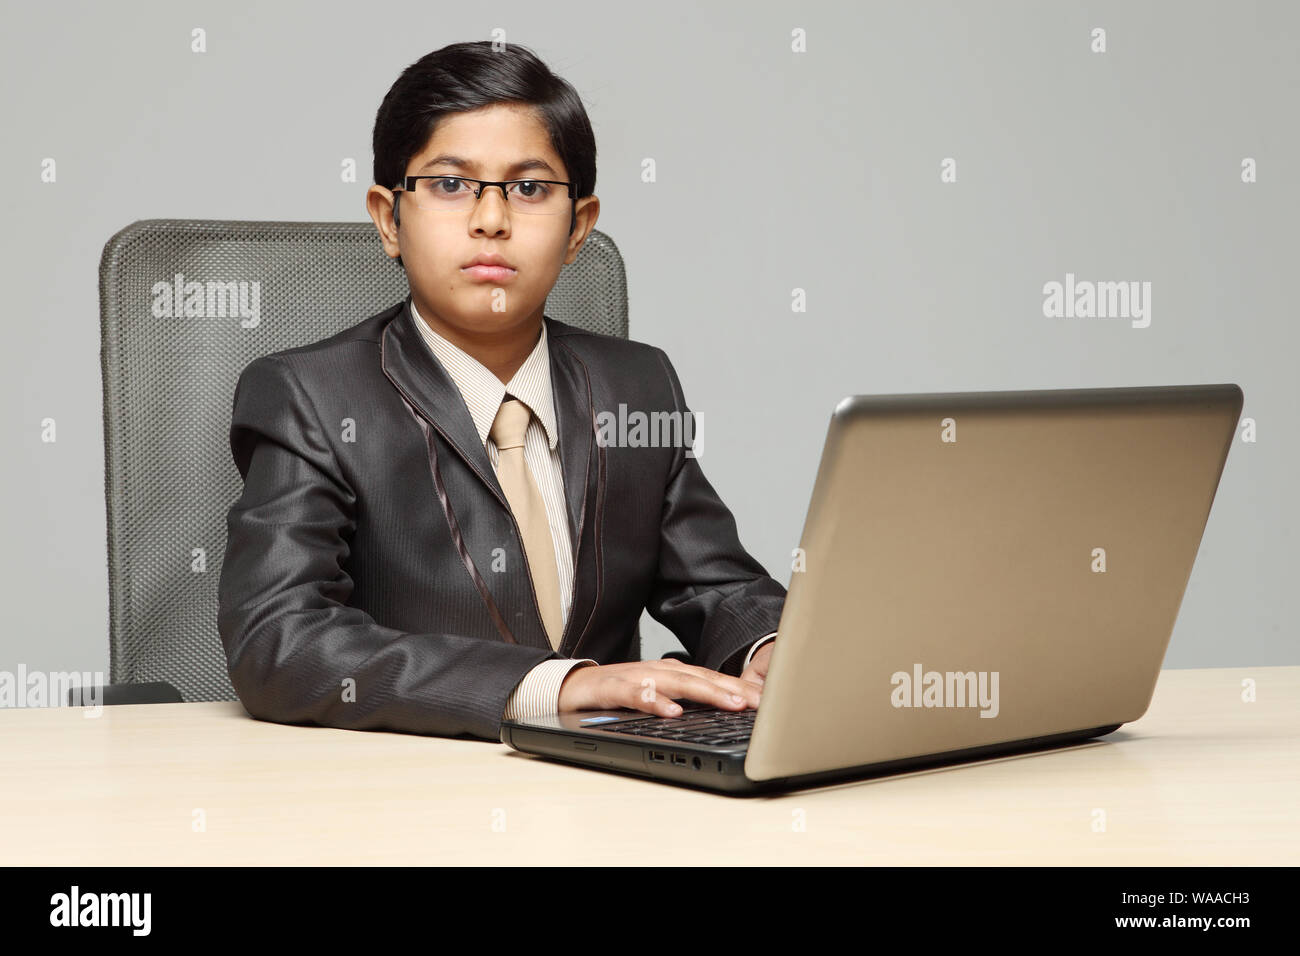 Boy pretending to be a businessman working on a laptop in an office Stock Photo